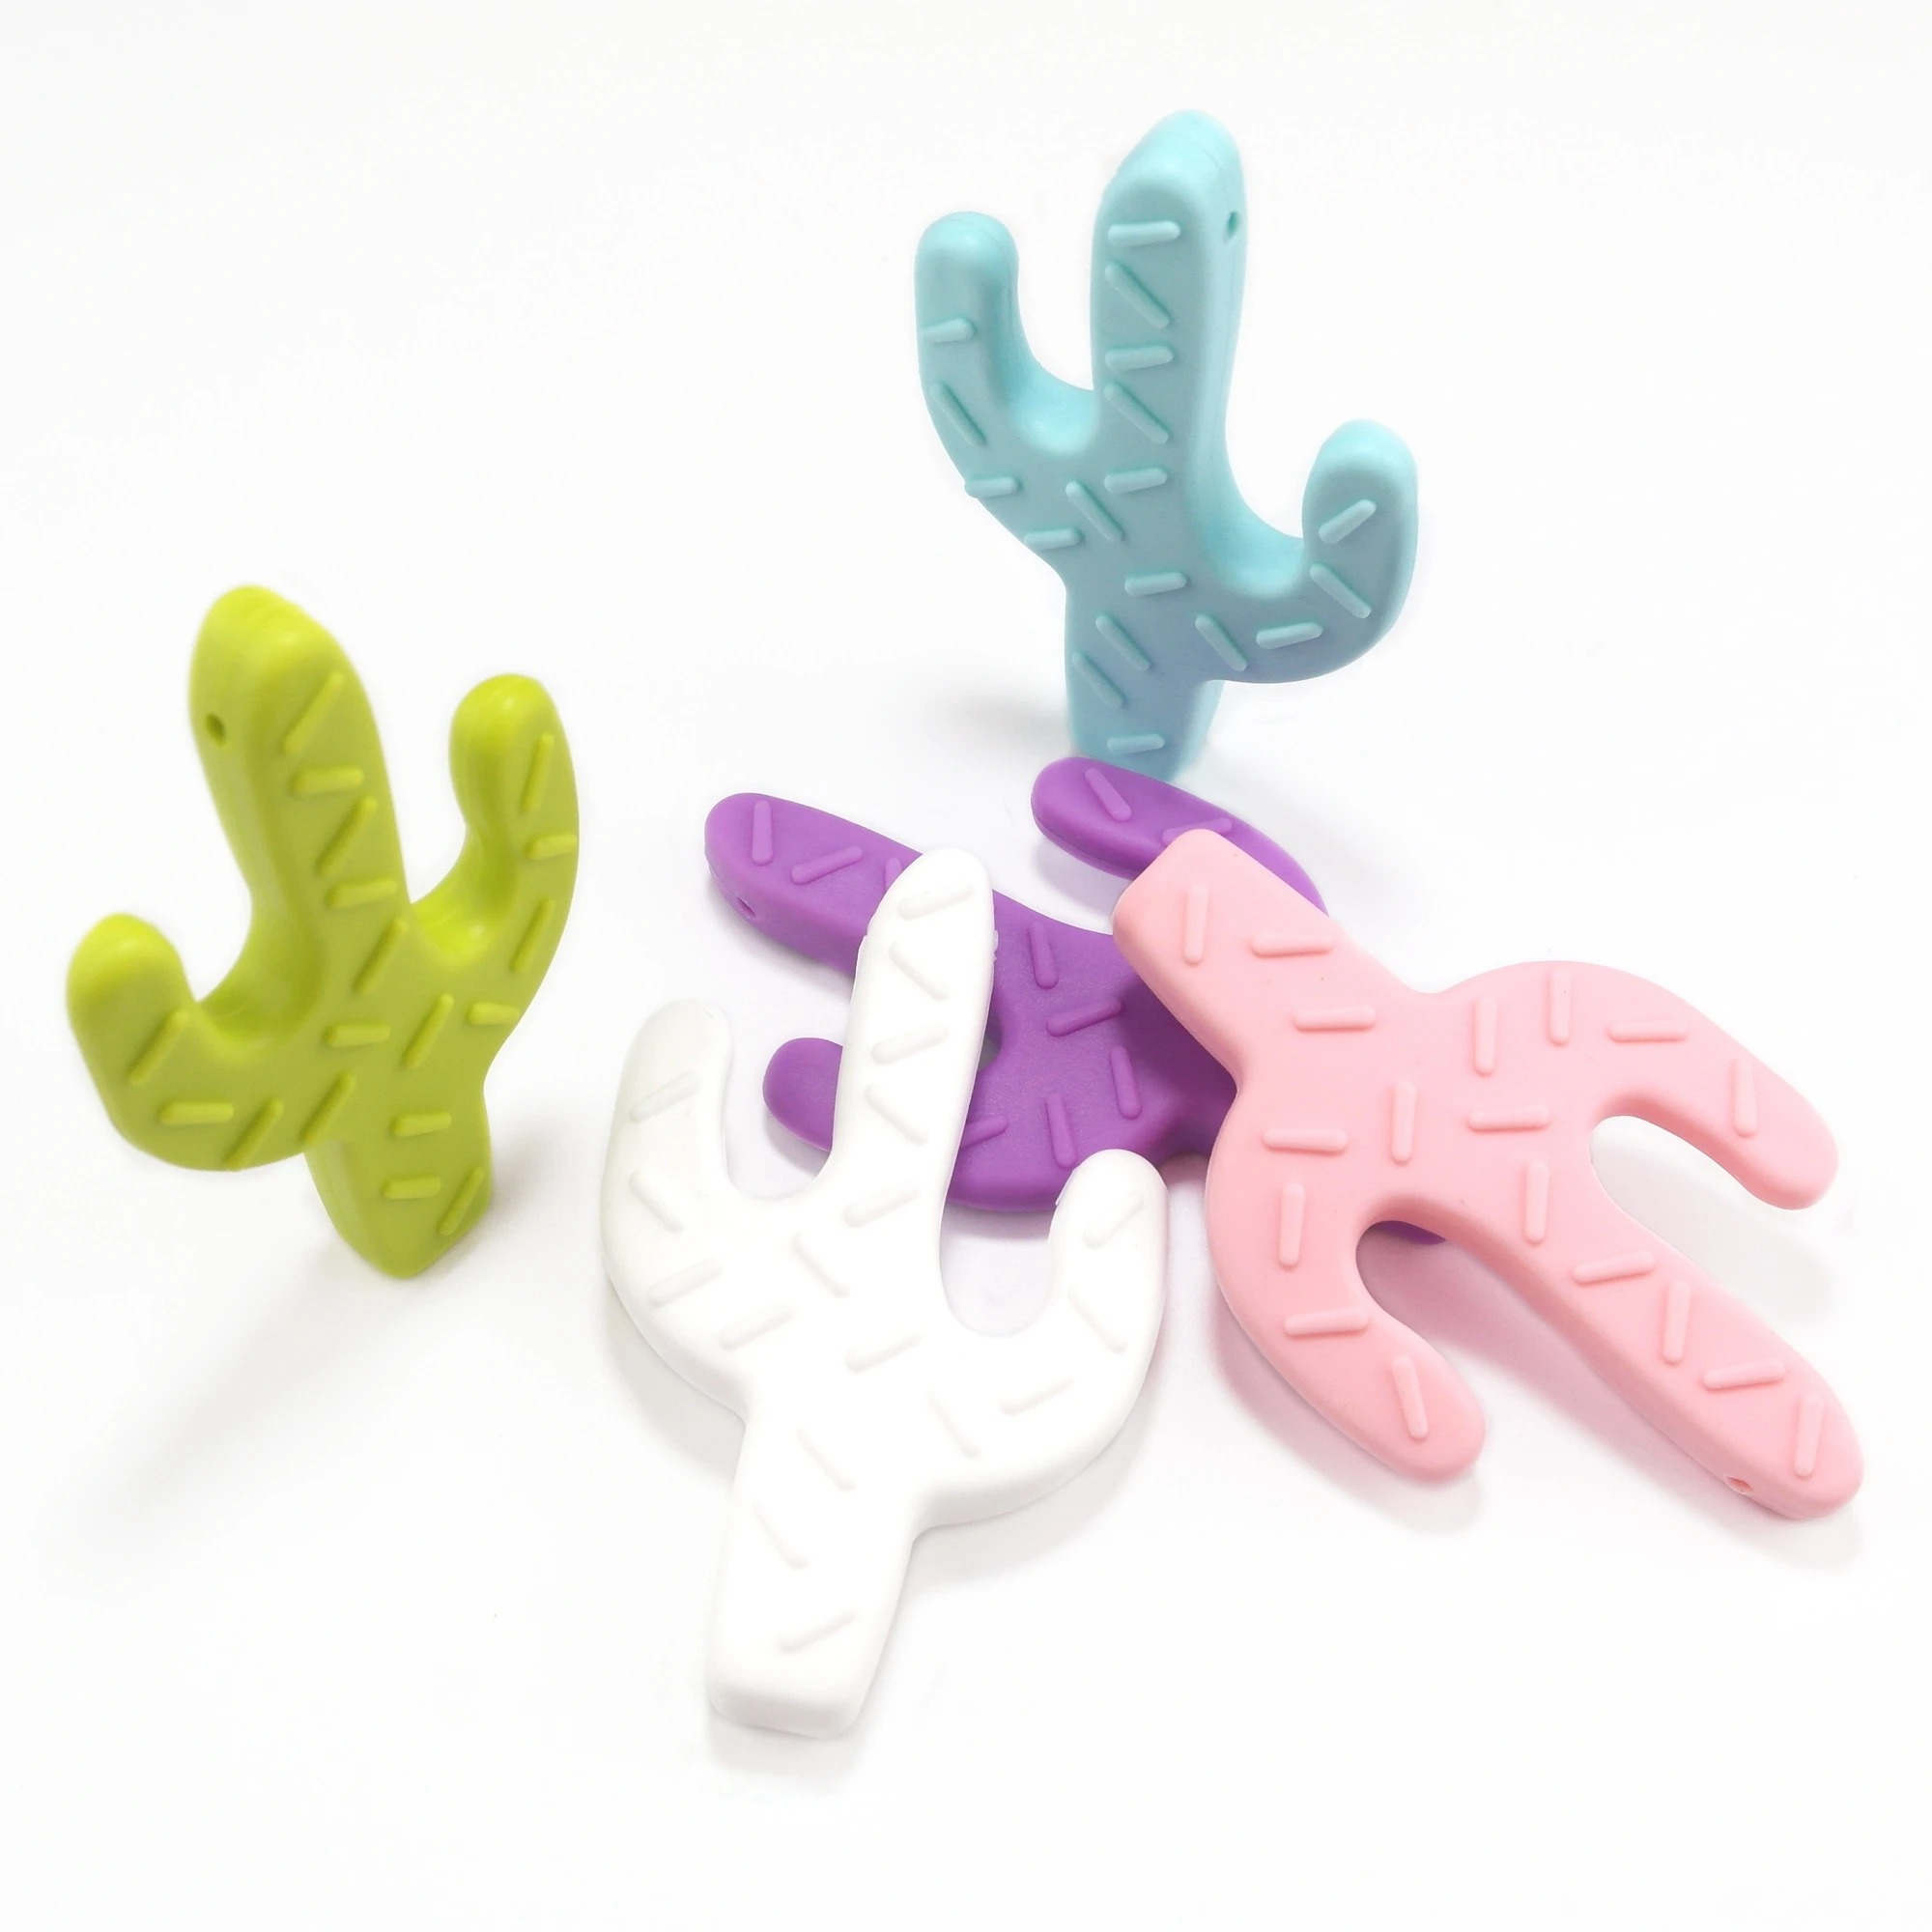 50pcs Baby Nursing Pendant Silicone Cacti BPA Free Silicone Teether Cactus Crib Teething Toys Accessories Baby Teether Charms